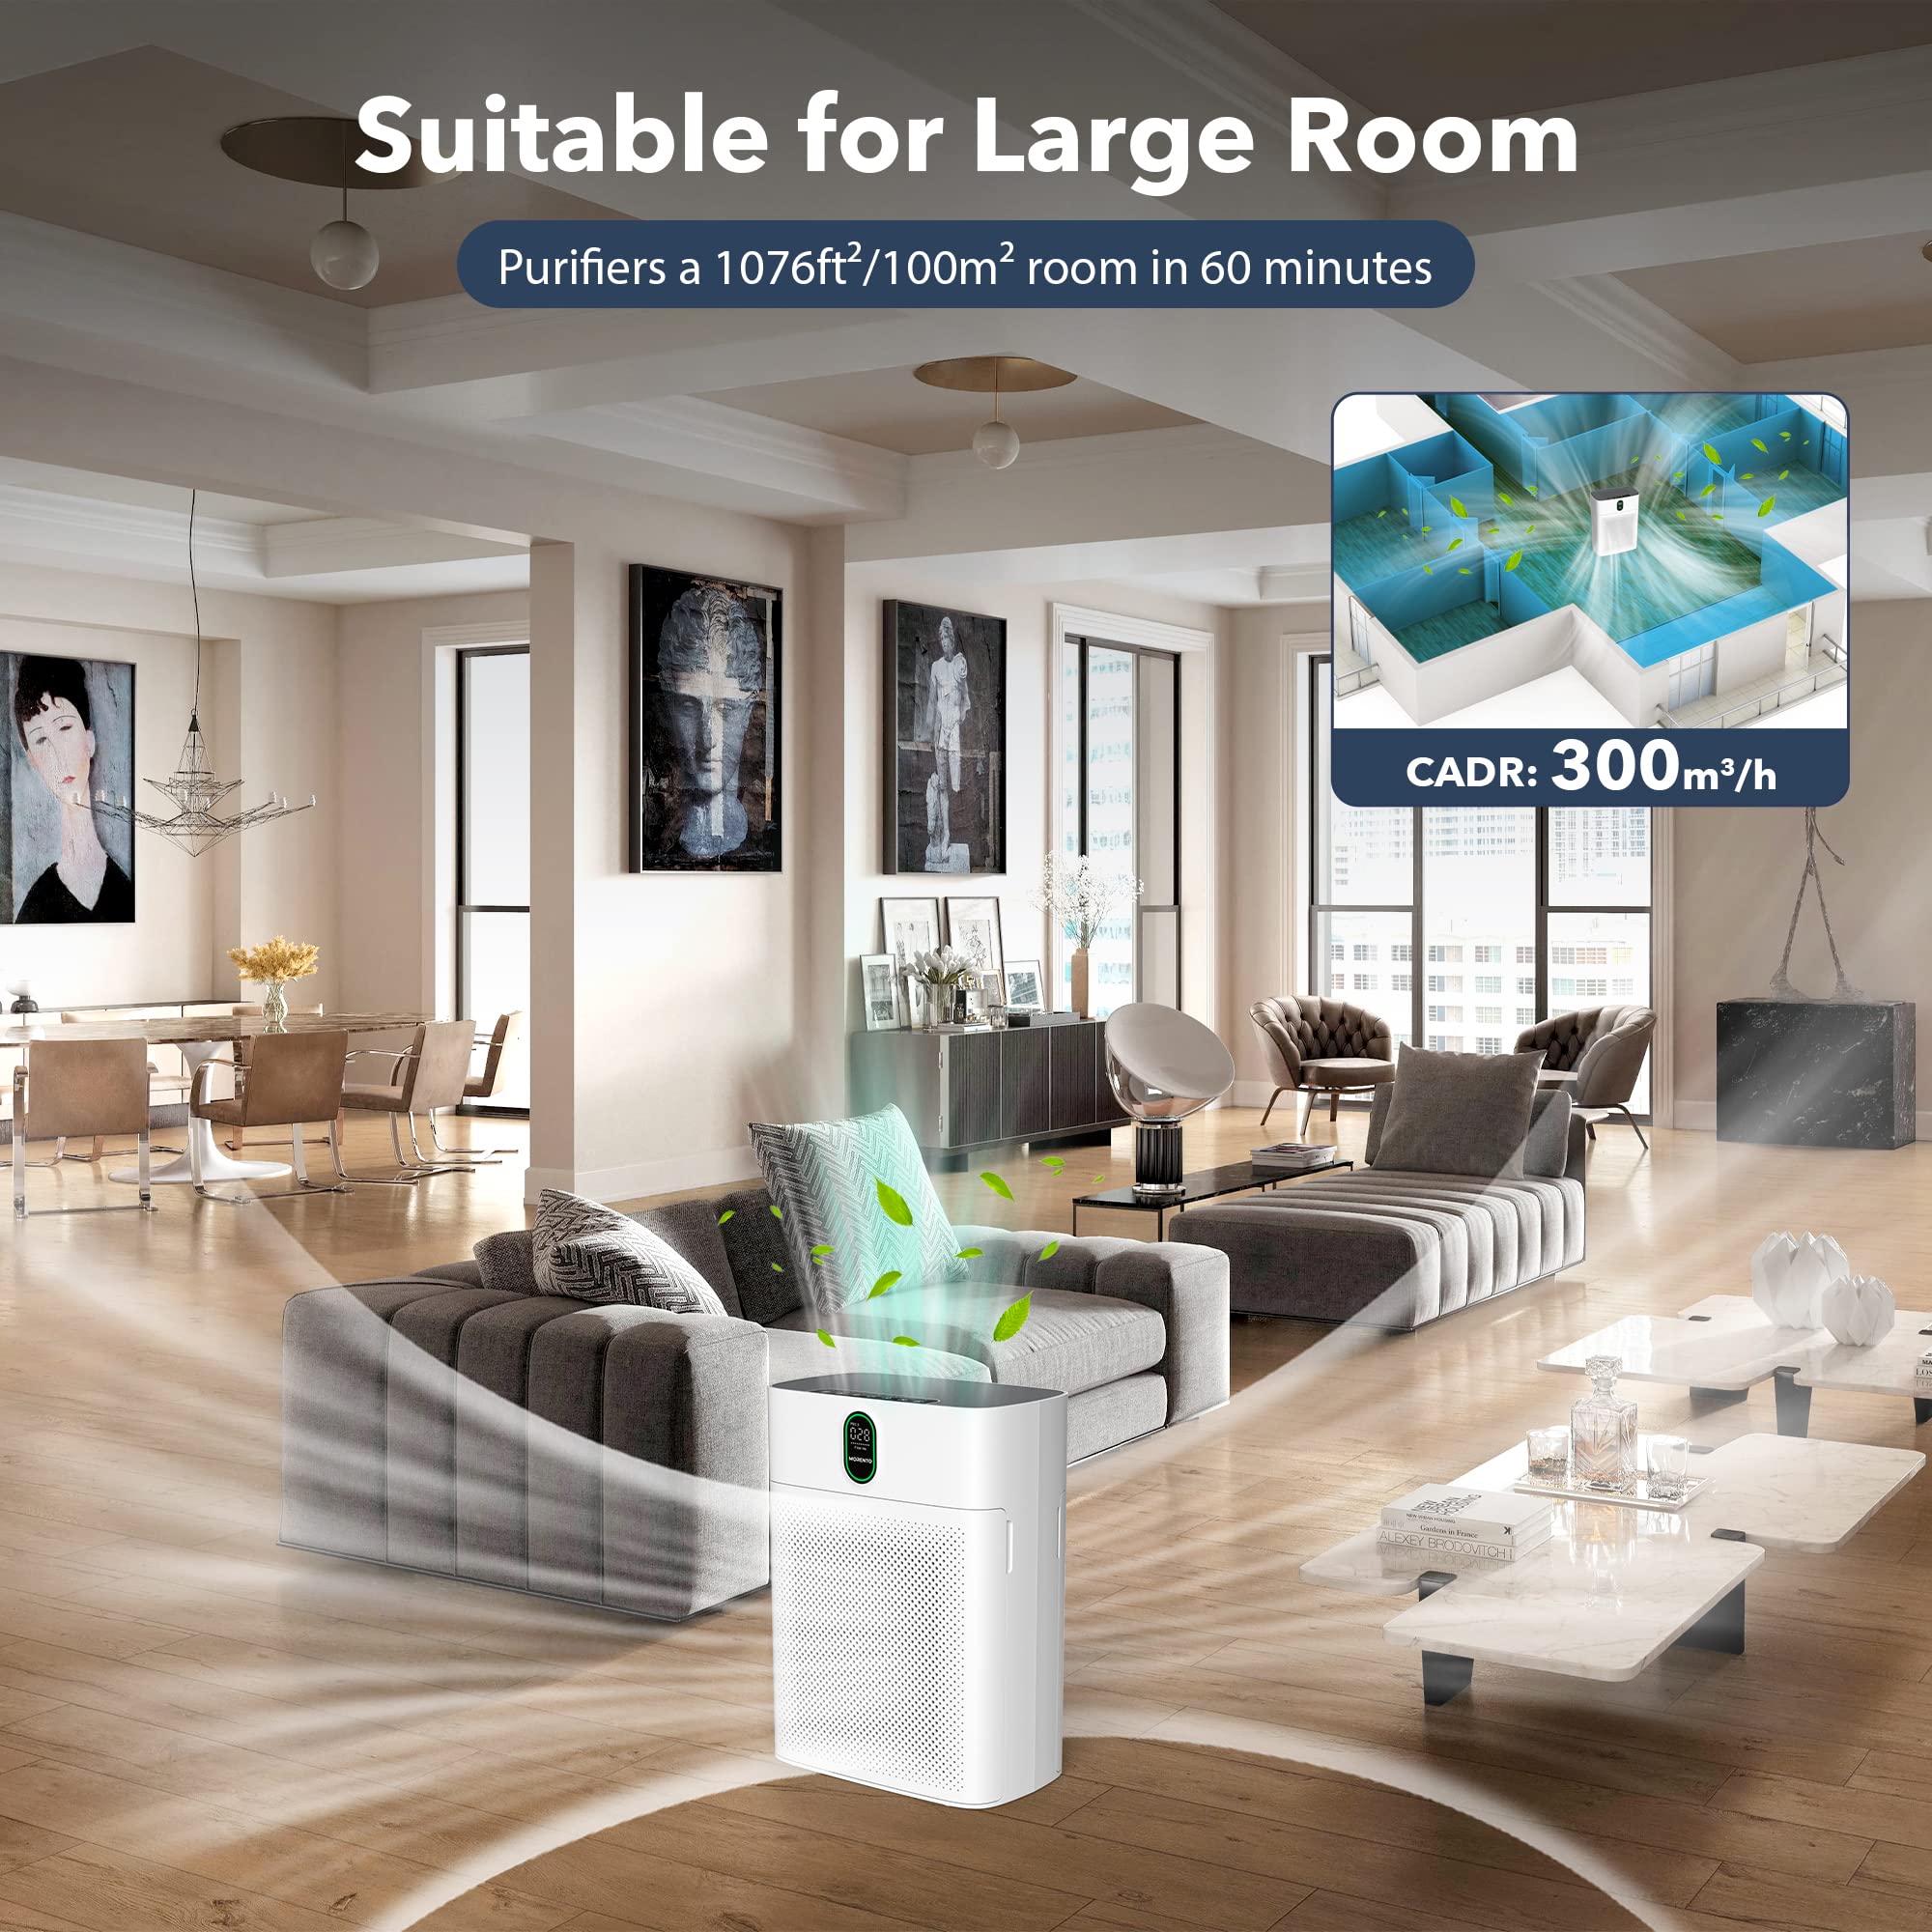 Air Purifiers for Home Large Room Up to 1076 Sq Ft with PM 2.5 Display Air Quality Sensor, MORENTO H13 True HEPA Filter Remove 99.97% of Pet Hair with Double-sided Air Inlet, 24dB for Bedroom, White